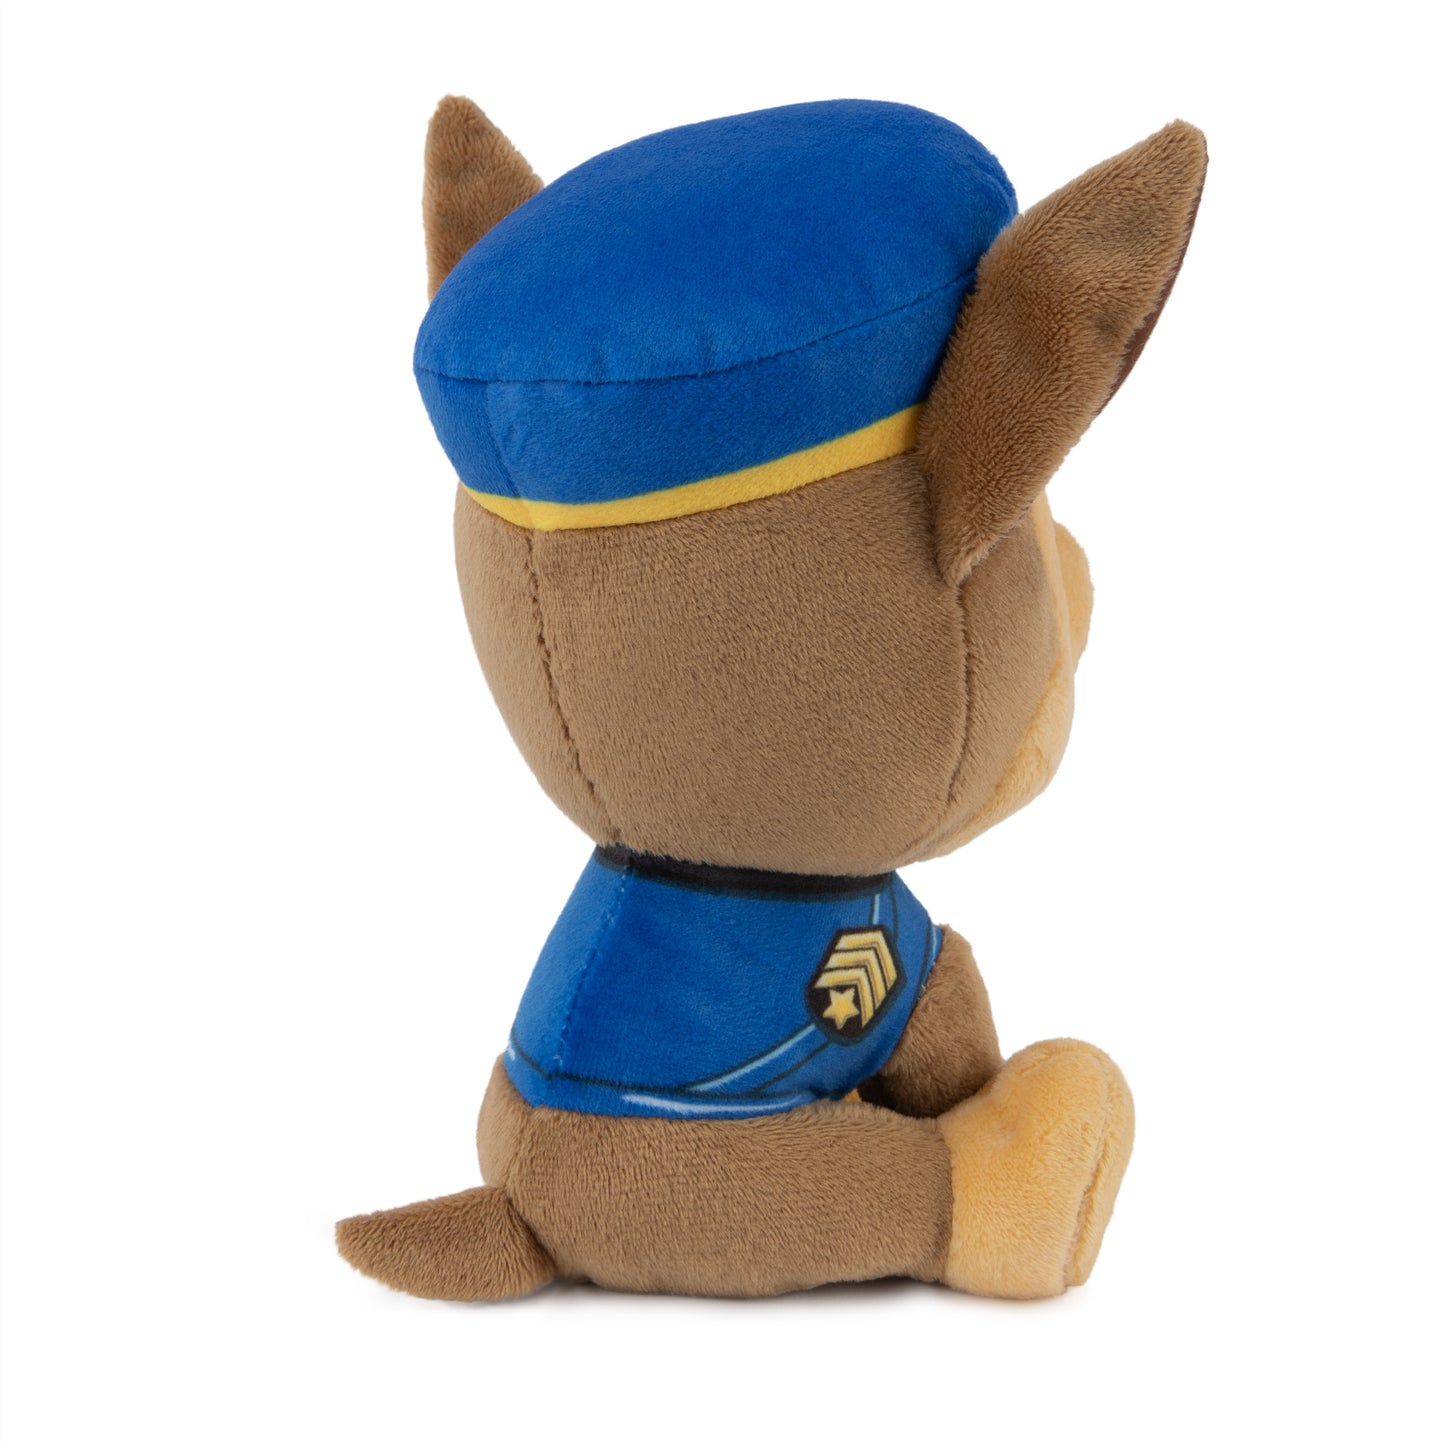 GUND Official PAW Patrol Chase in Signature Police Officer Uniform Plush Toy, Stuffed Animal for Ages 1 and Up, 6"